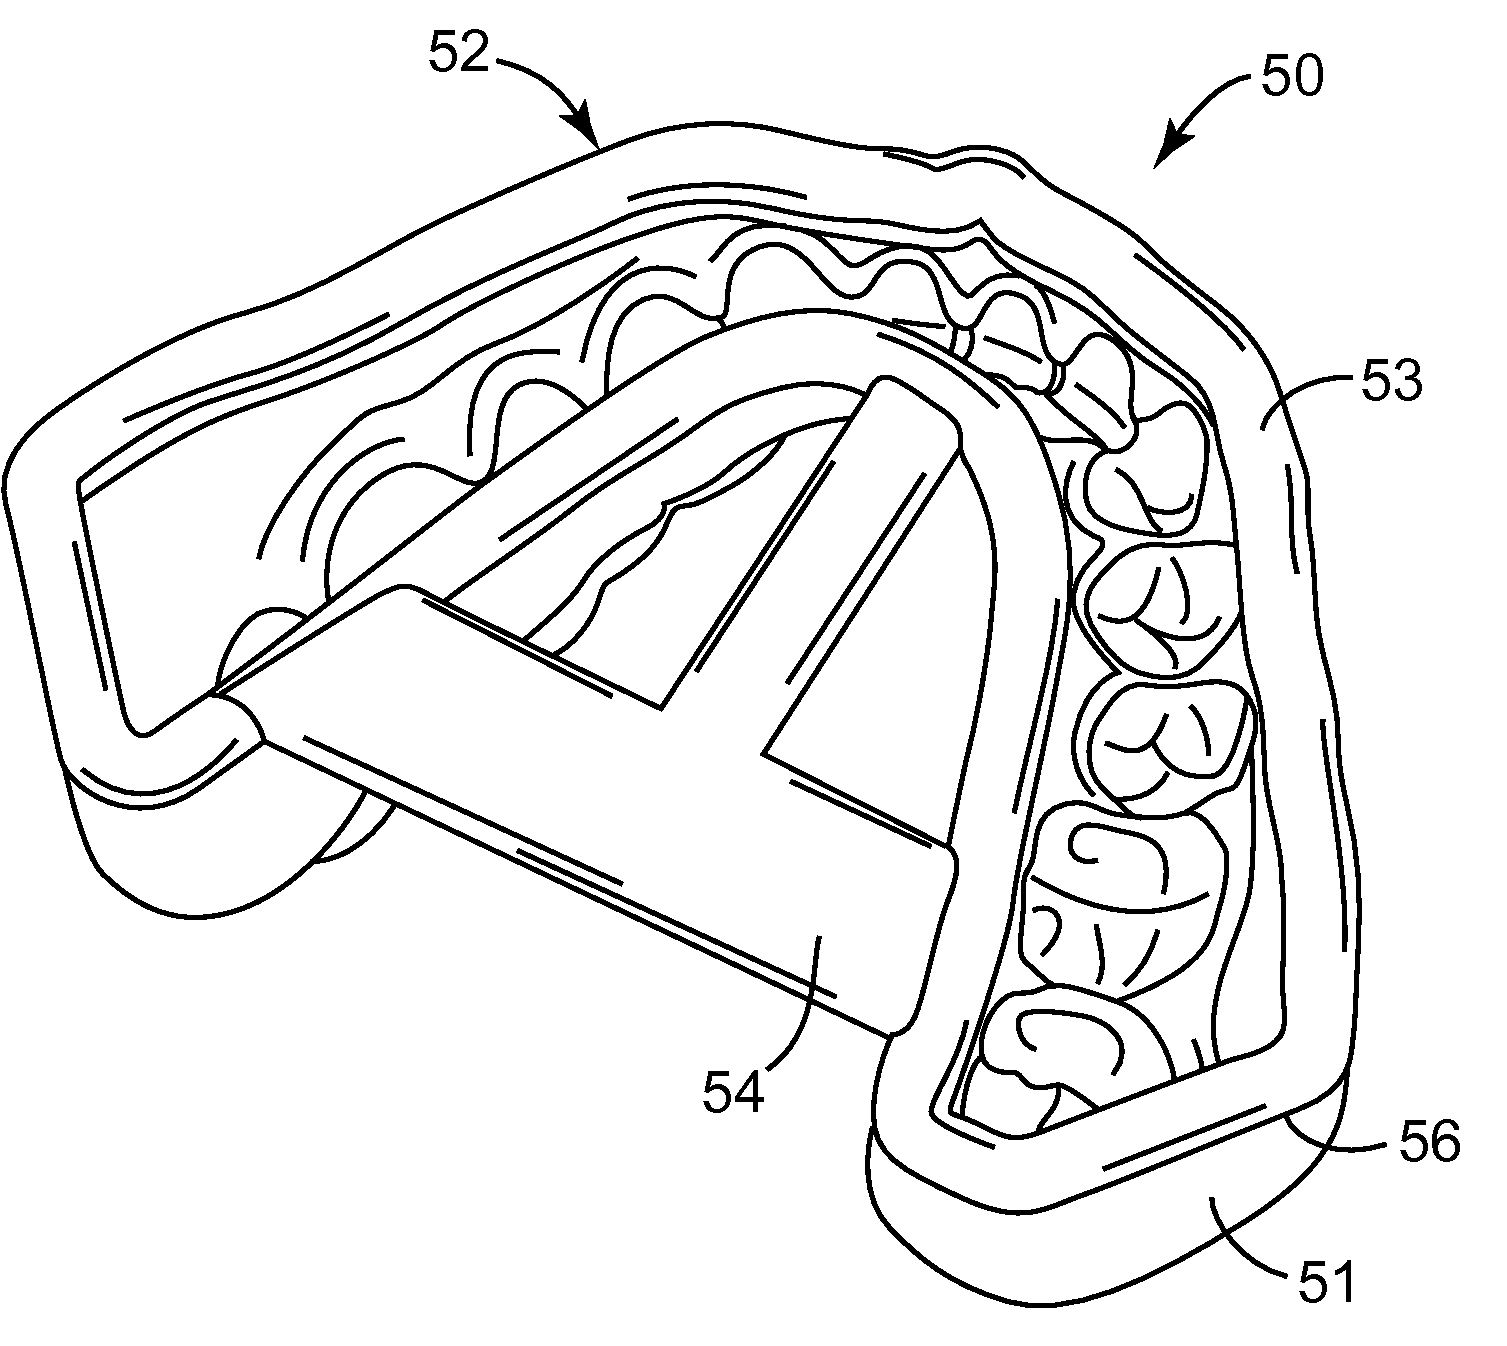 Digitally forming a dental model for fabricating orthodontic laboratory appliances